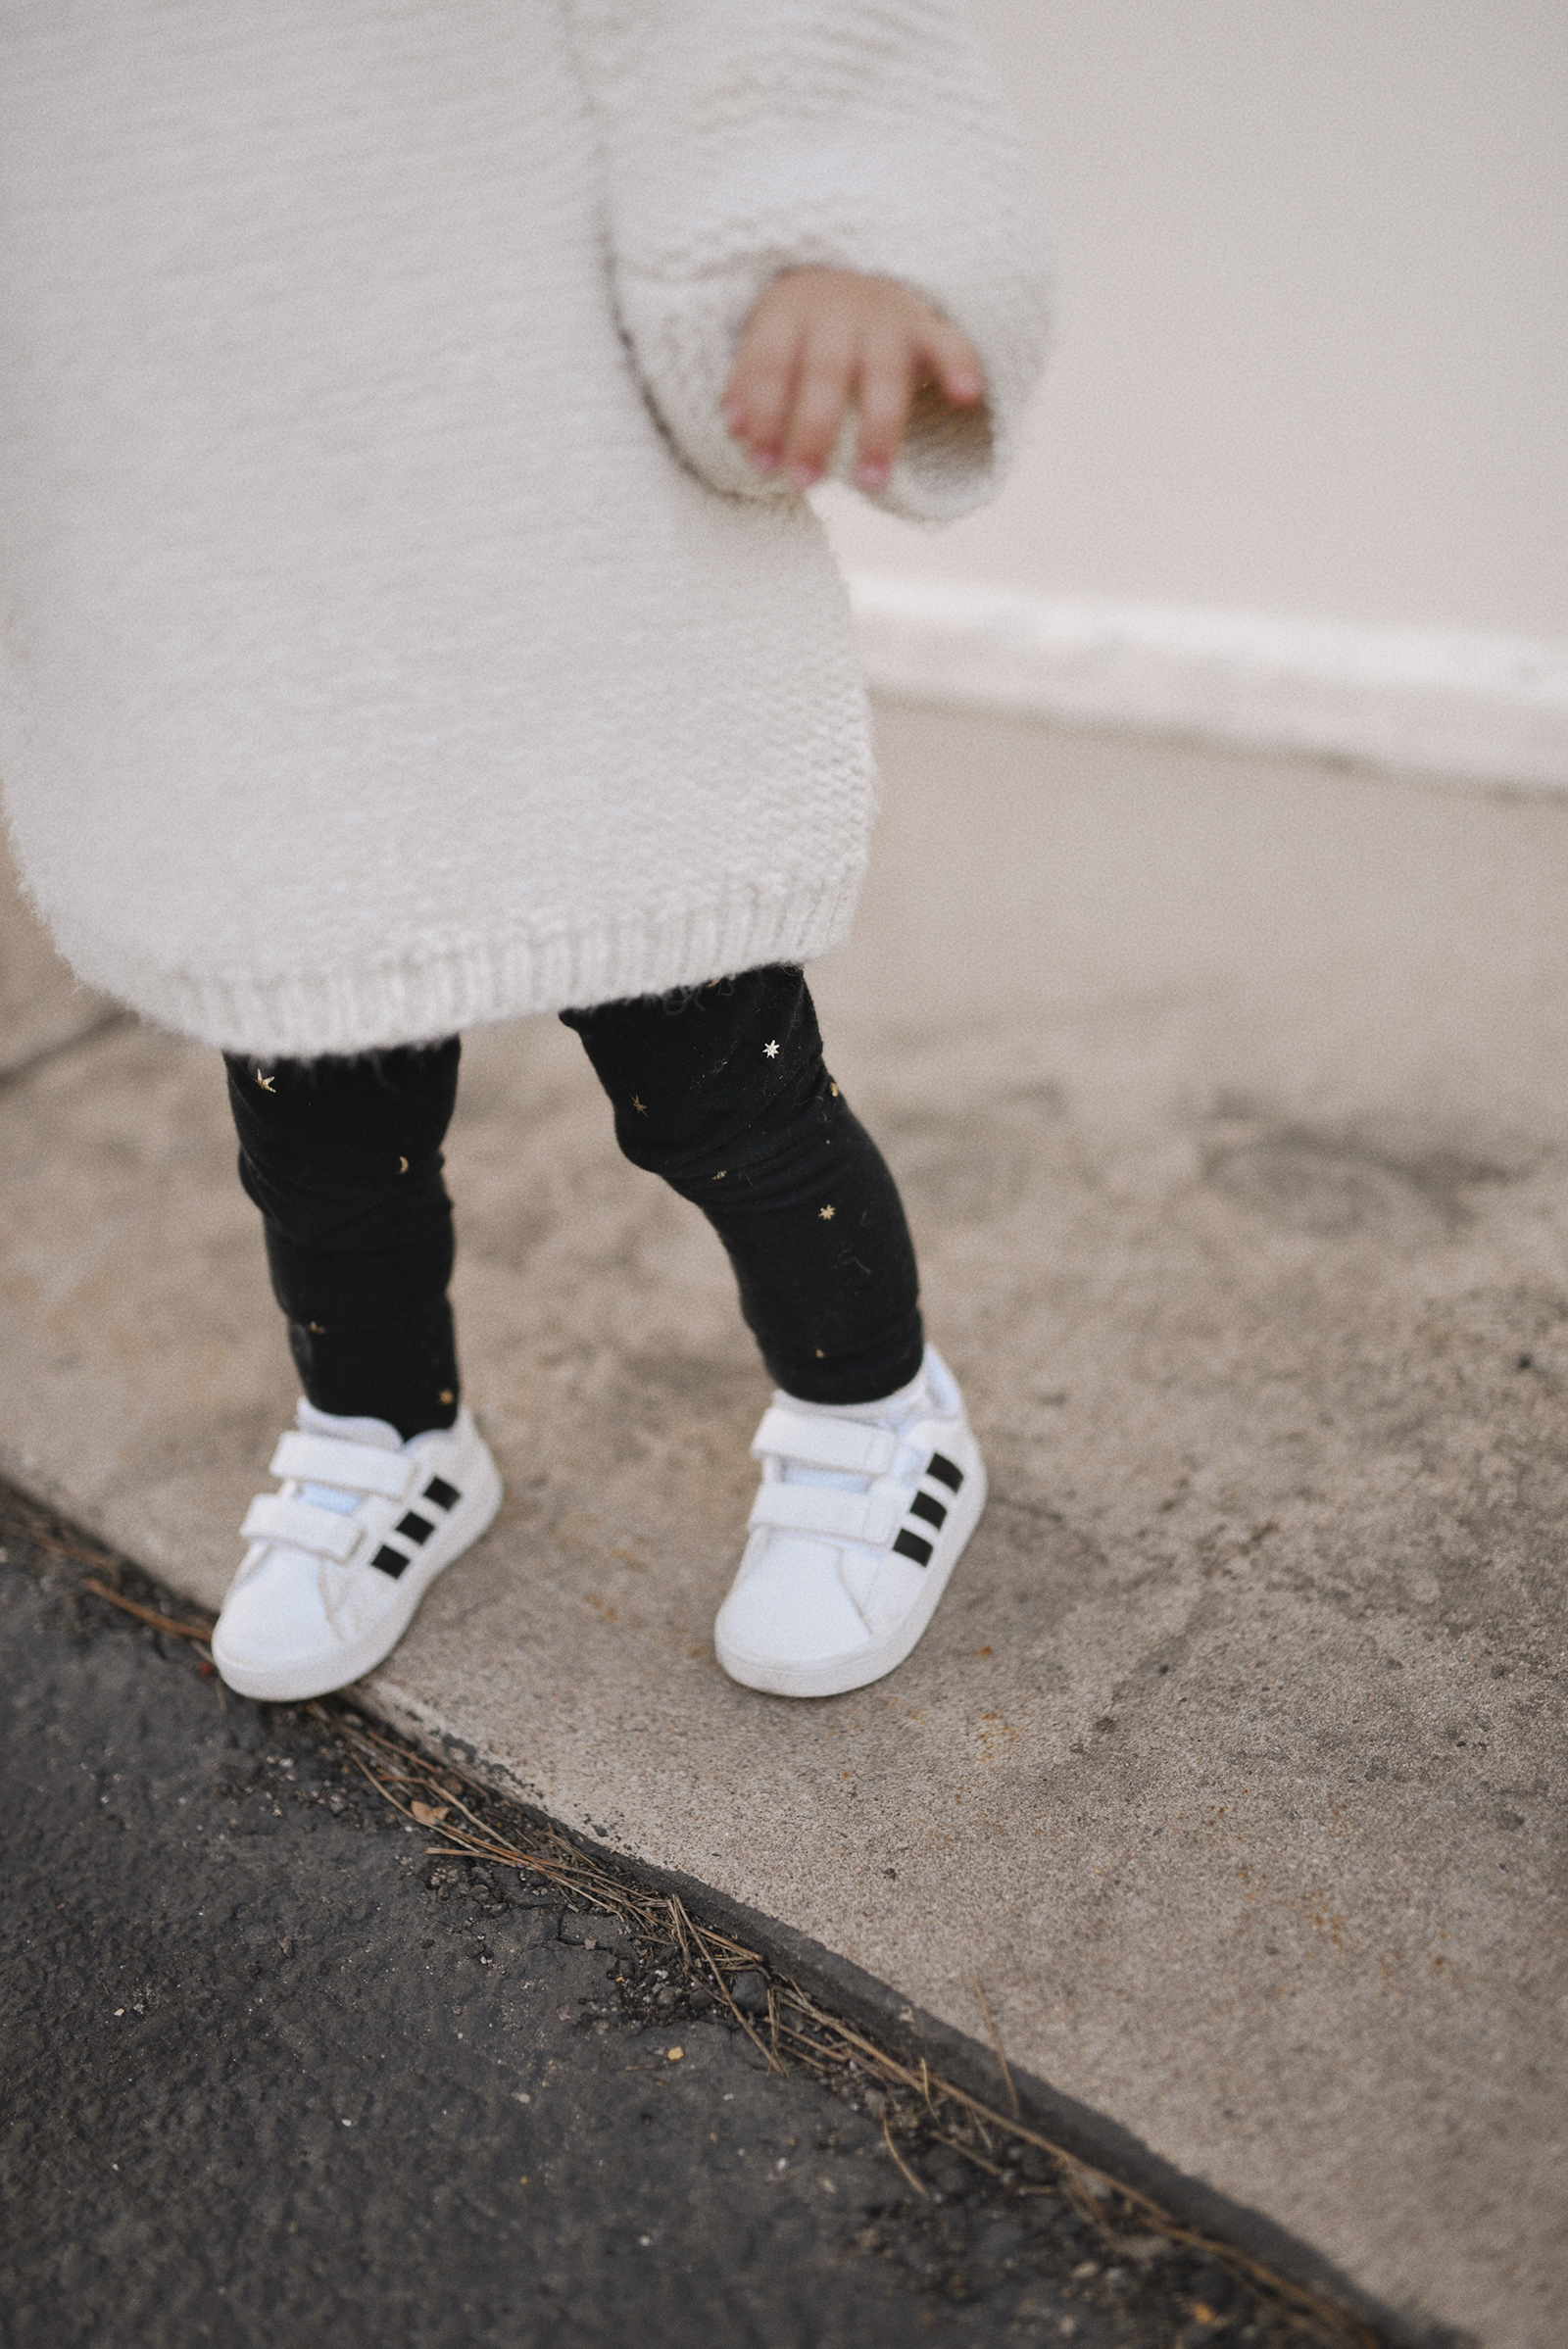 Carolina Hellal of Chic Talk and her daughter Sofia Jaramillo-Hellal wearing matching outfits in Adidas white sneakers